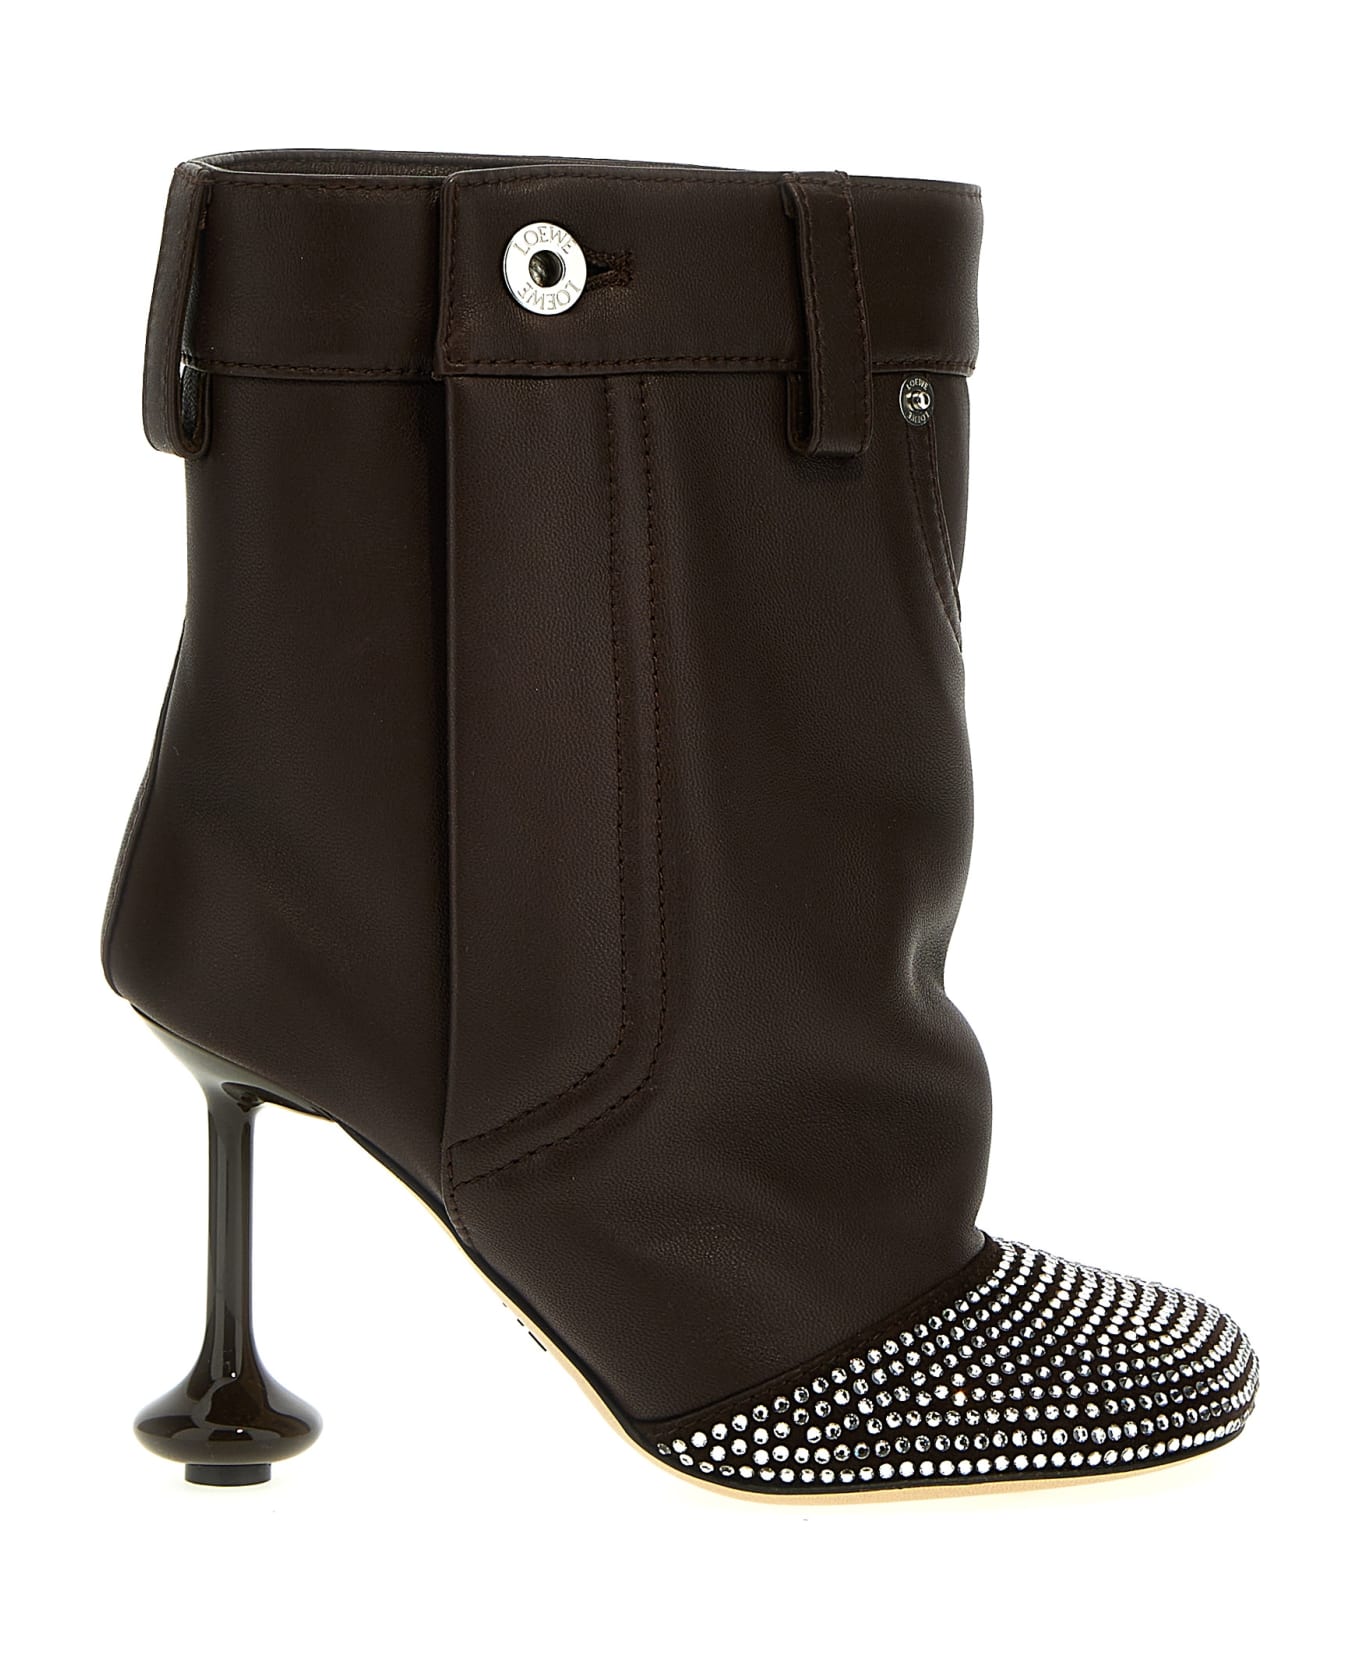 Loewe 'toy' Ankle Boots - Brown ブーツ